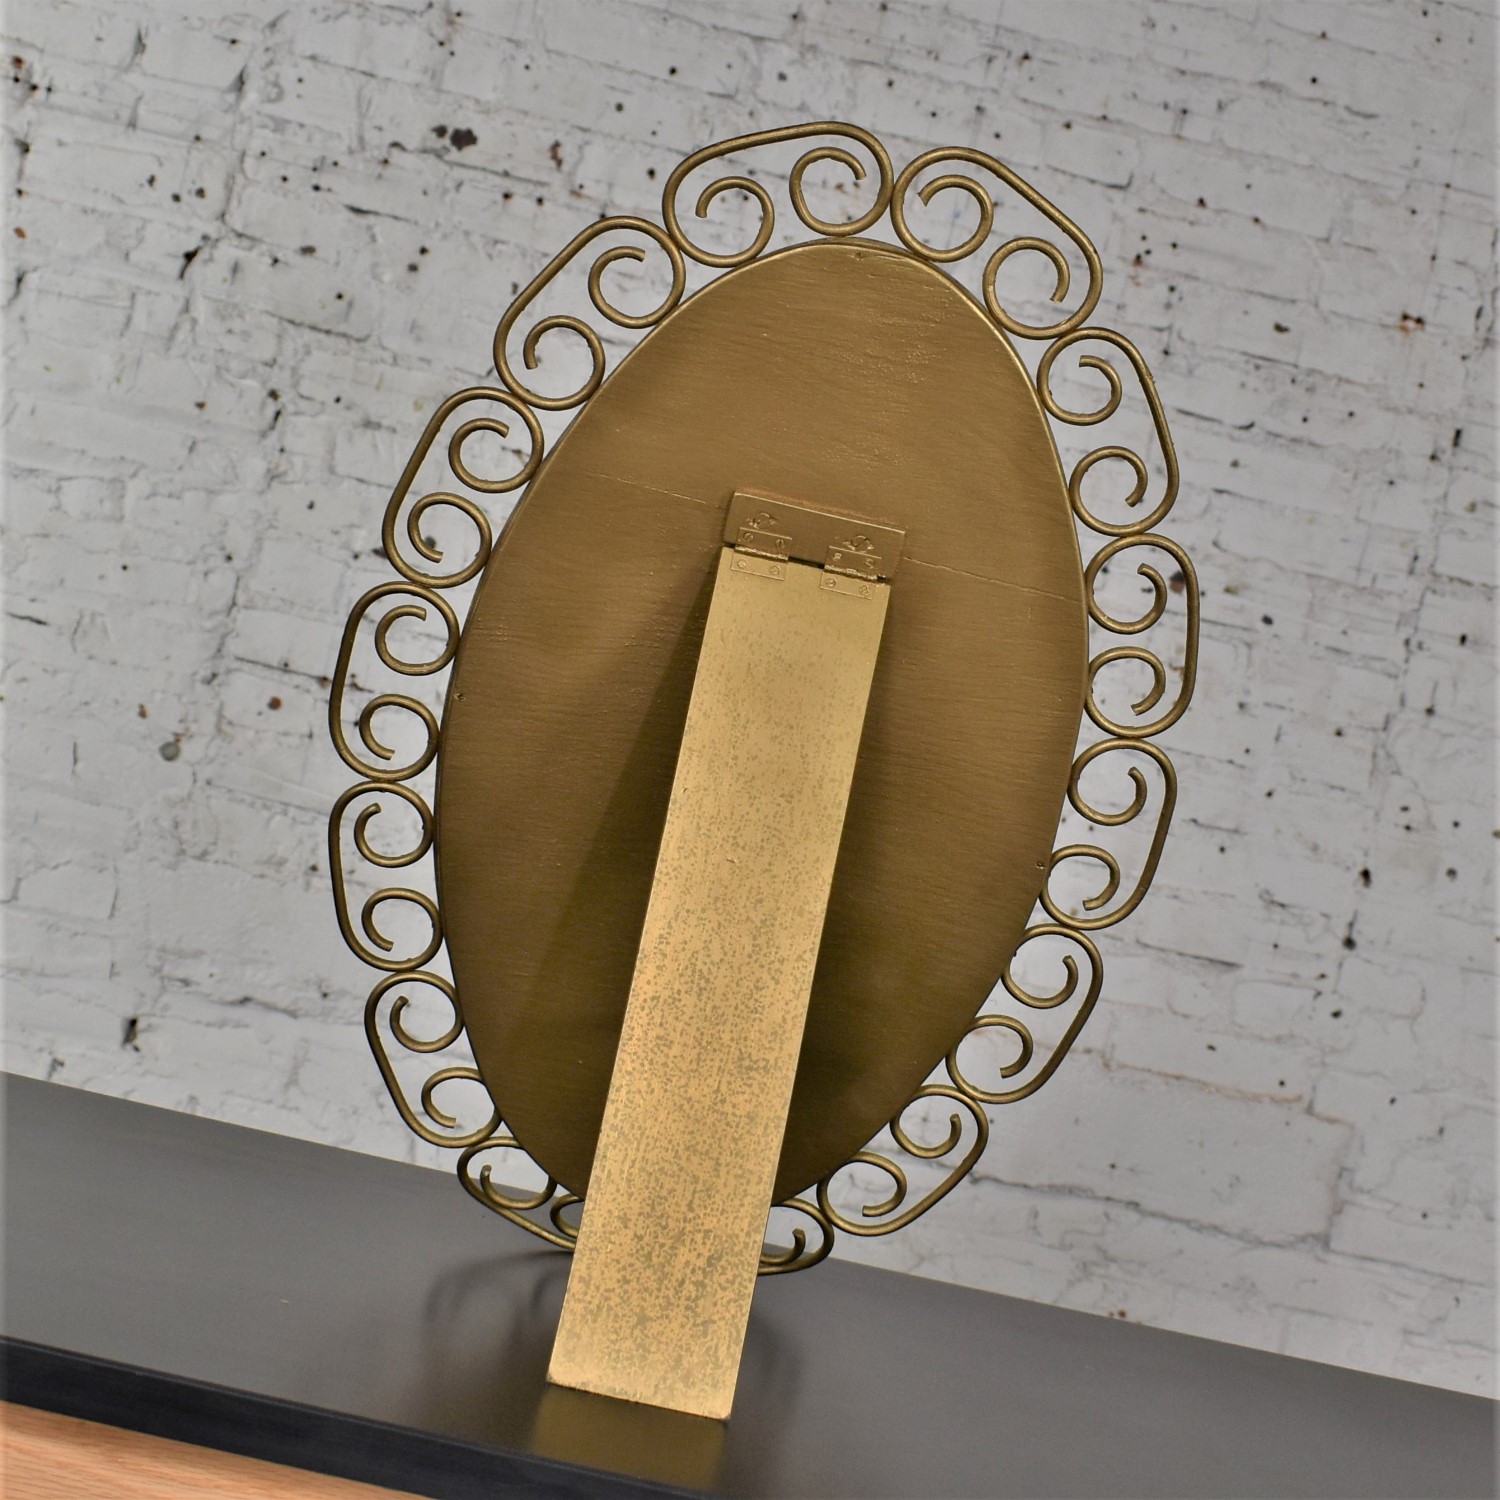 1960-1970’s Hollywood Regency Bohemian Free Standing Mirror Gold Painted Wicker Scroll Clad Frame